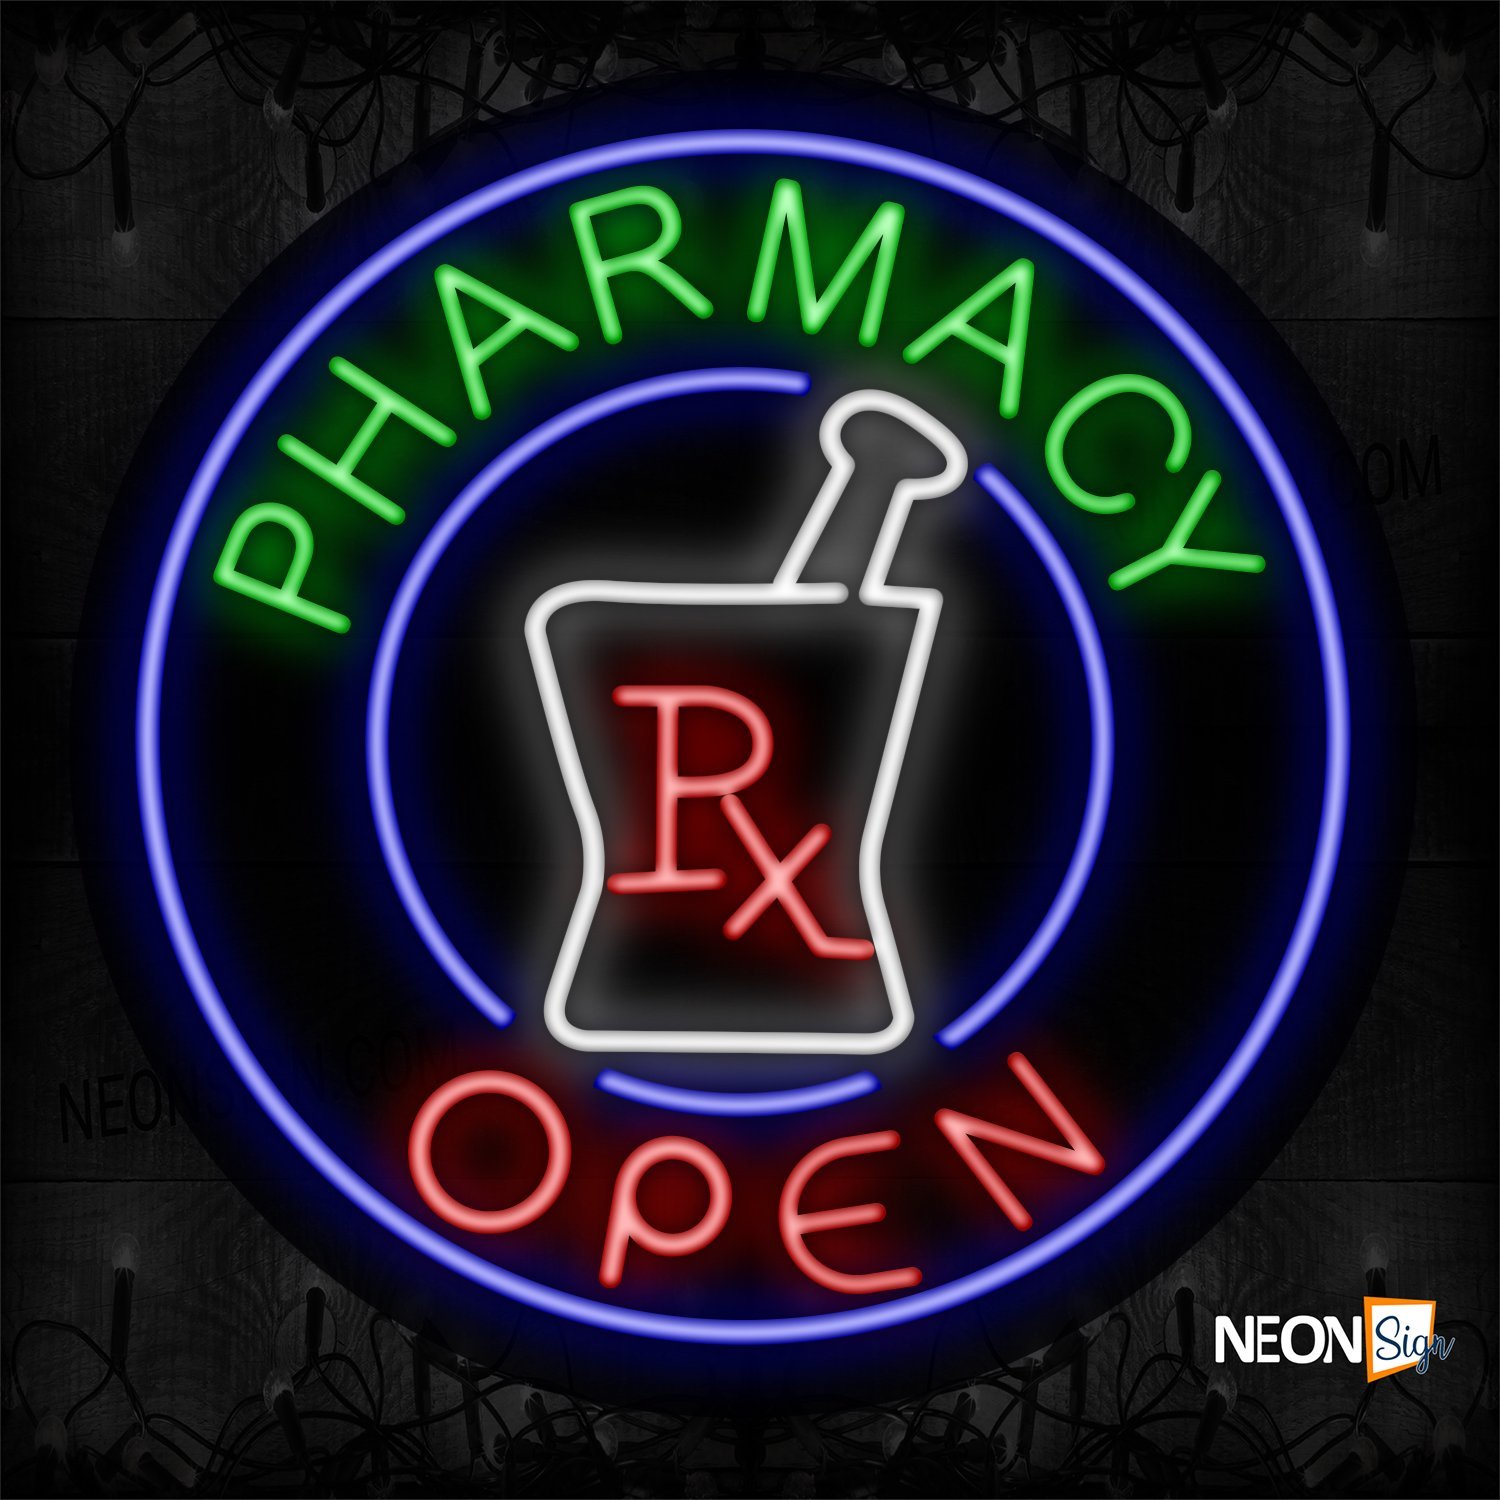 Image of 11160 Pharmacy Open With Circle Border Neon Sign_26x26 Contoured Black Backing